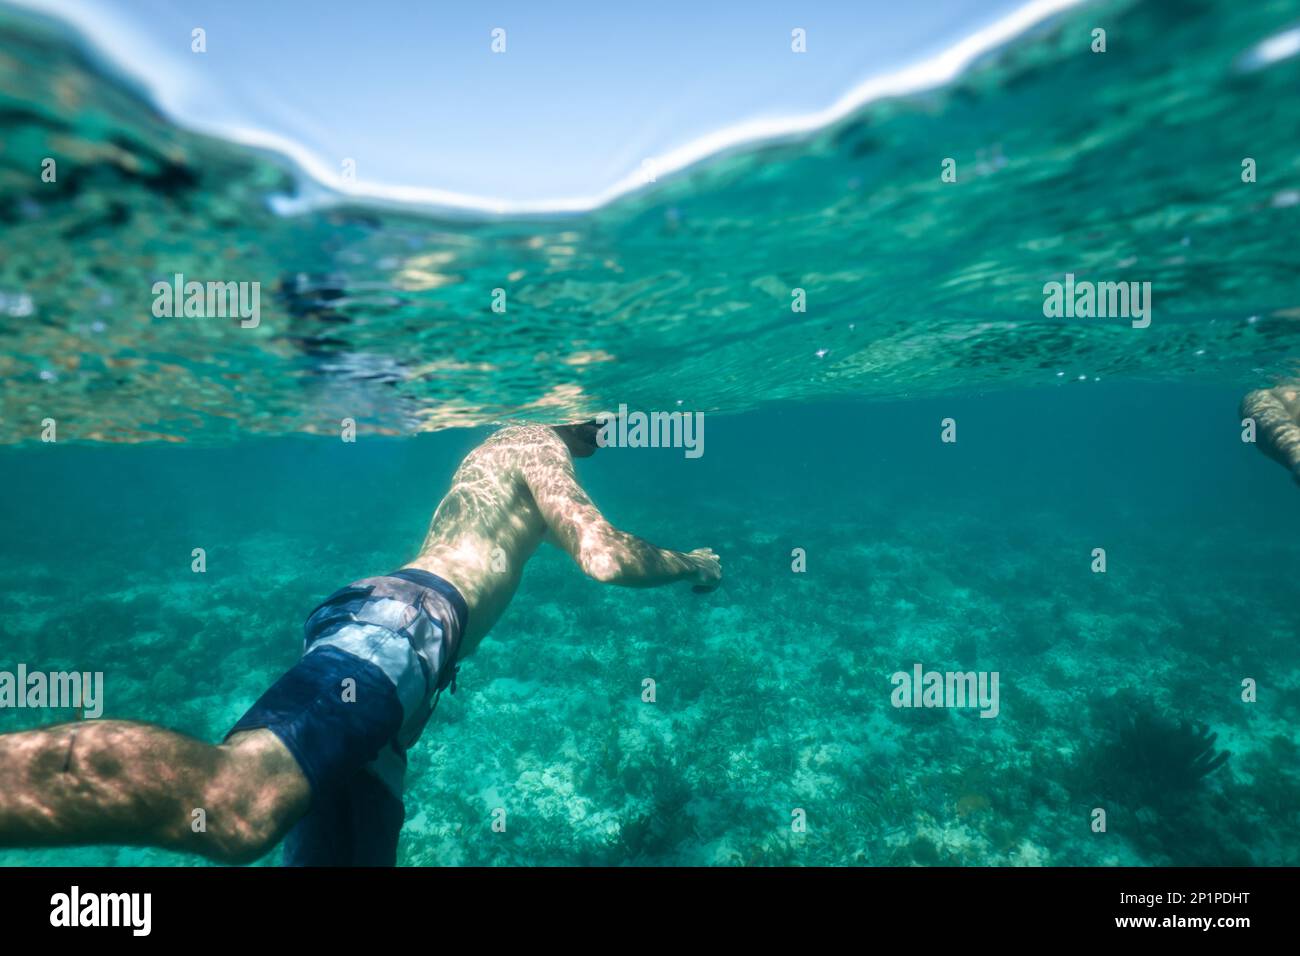 Half underwater photo, or split level photo, of a man snorkelling in the turquoise ocean in Turks and Caicos Islands, Caribbean, over a coral reef. Stock Photo